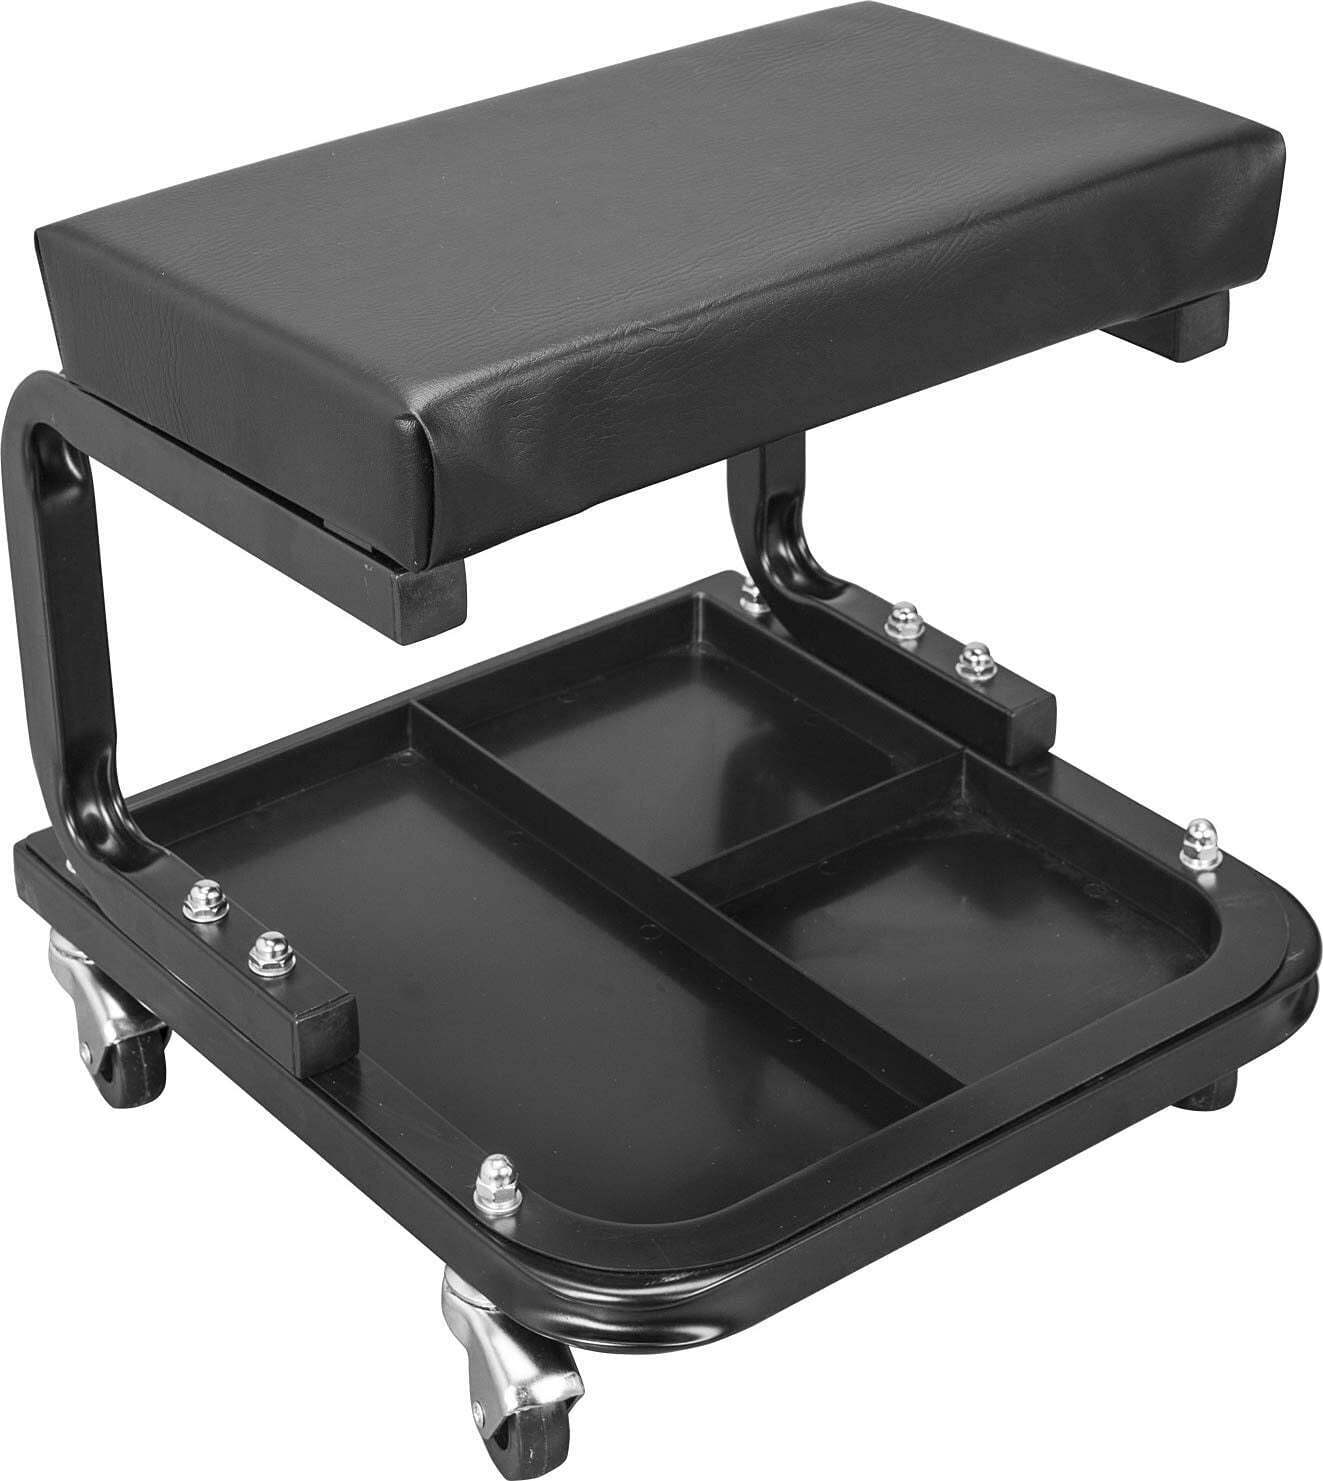 Rolling Creeper Garage/Shop Seat: Padded Mechanic Stool with Tool Tray